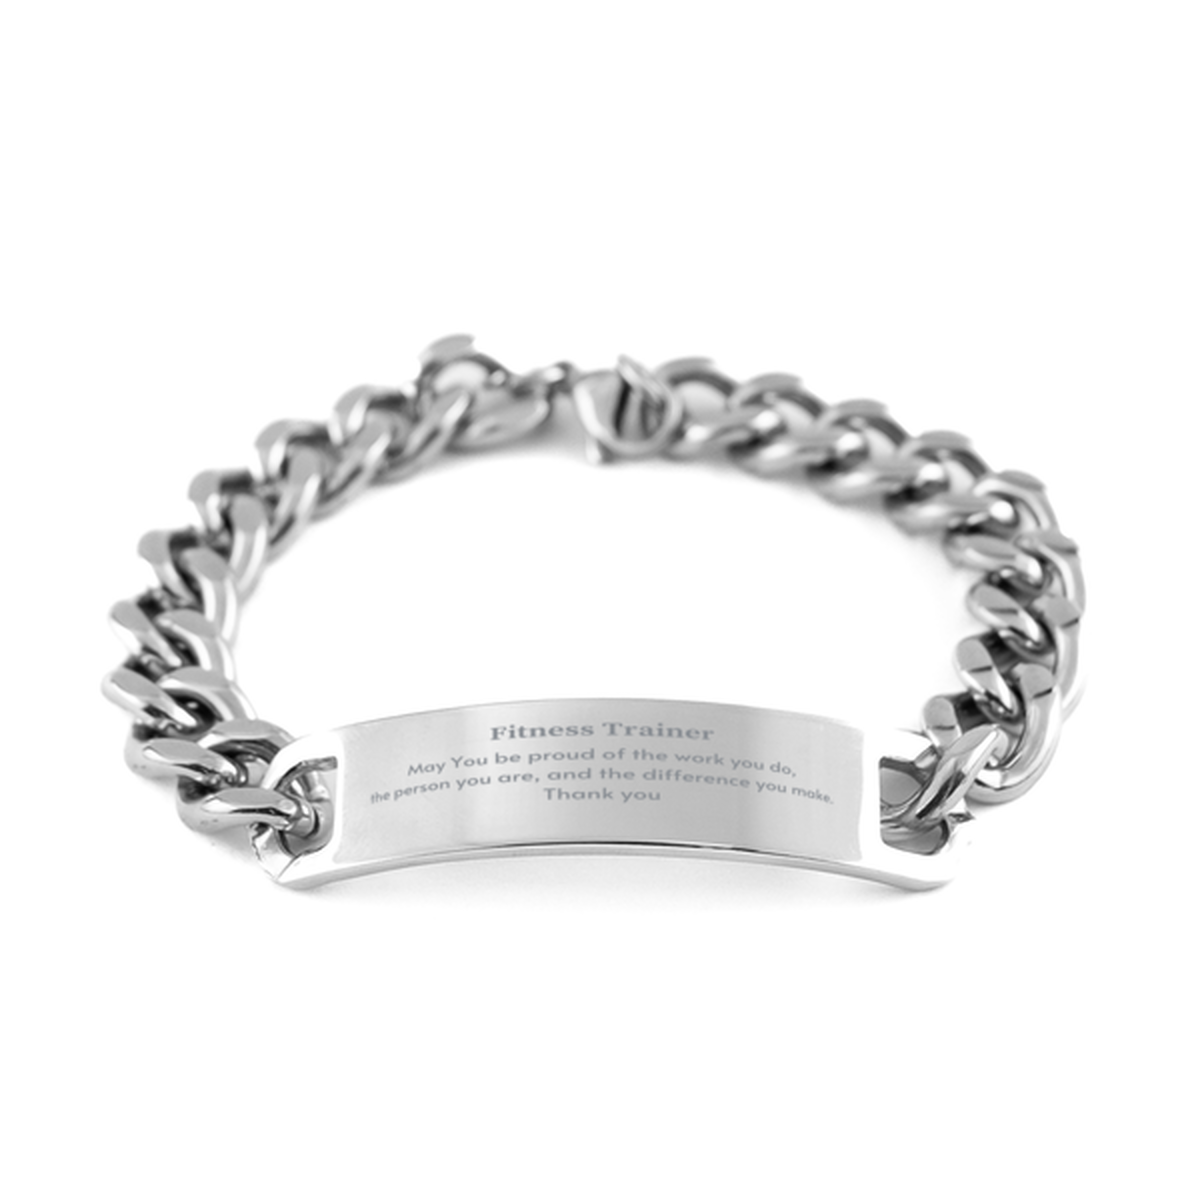 Heartwarming Cuban Chain Stainless Steel Bracelet Retirement Coworkers Gifts for Fitness Trainer, Fitness Trainer May You be proud of the work you do, the person you are Gifts for Boss Men Women Friends